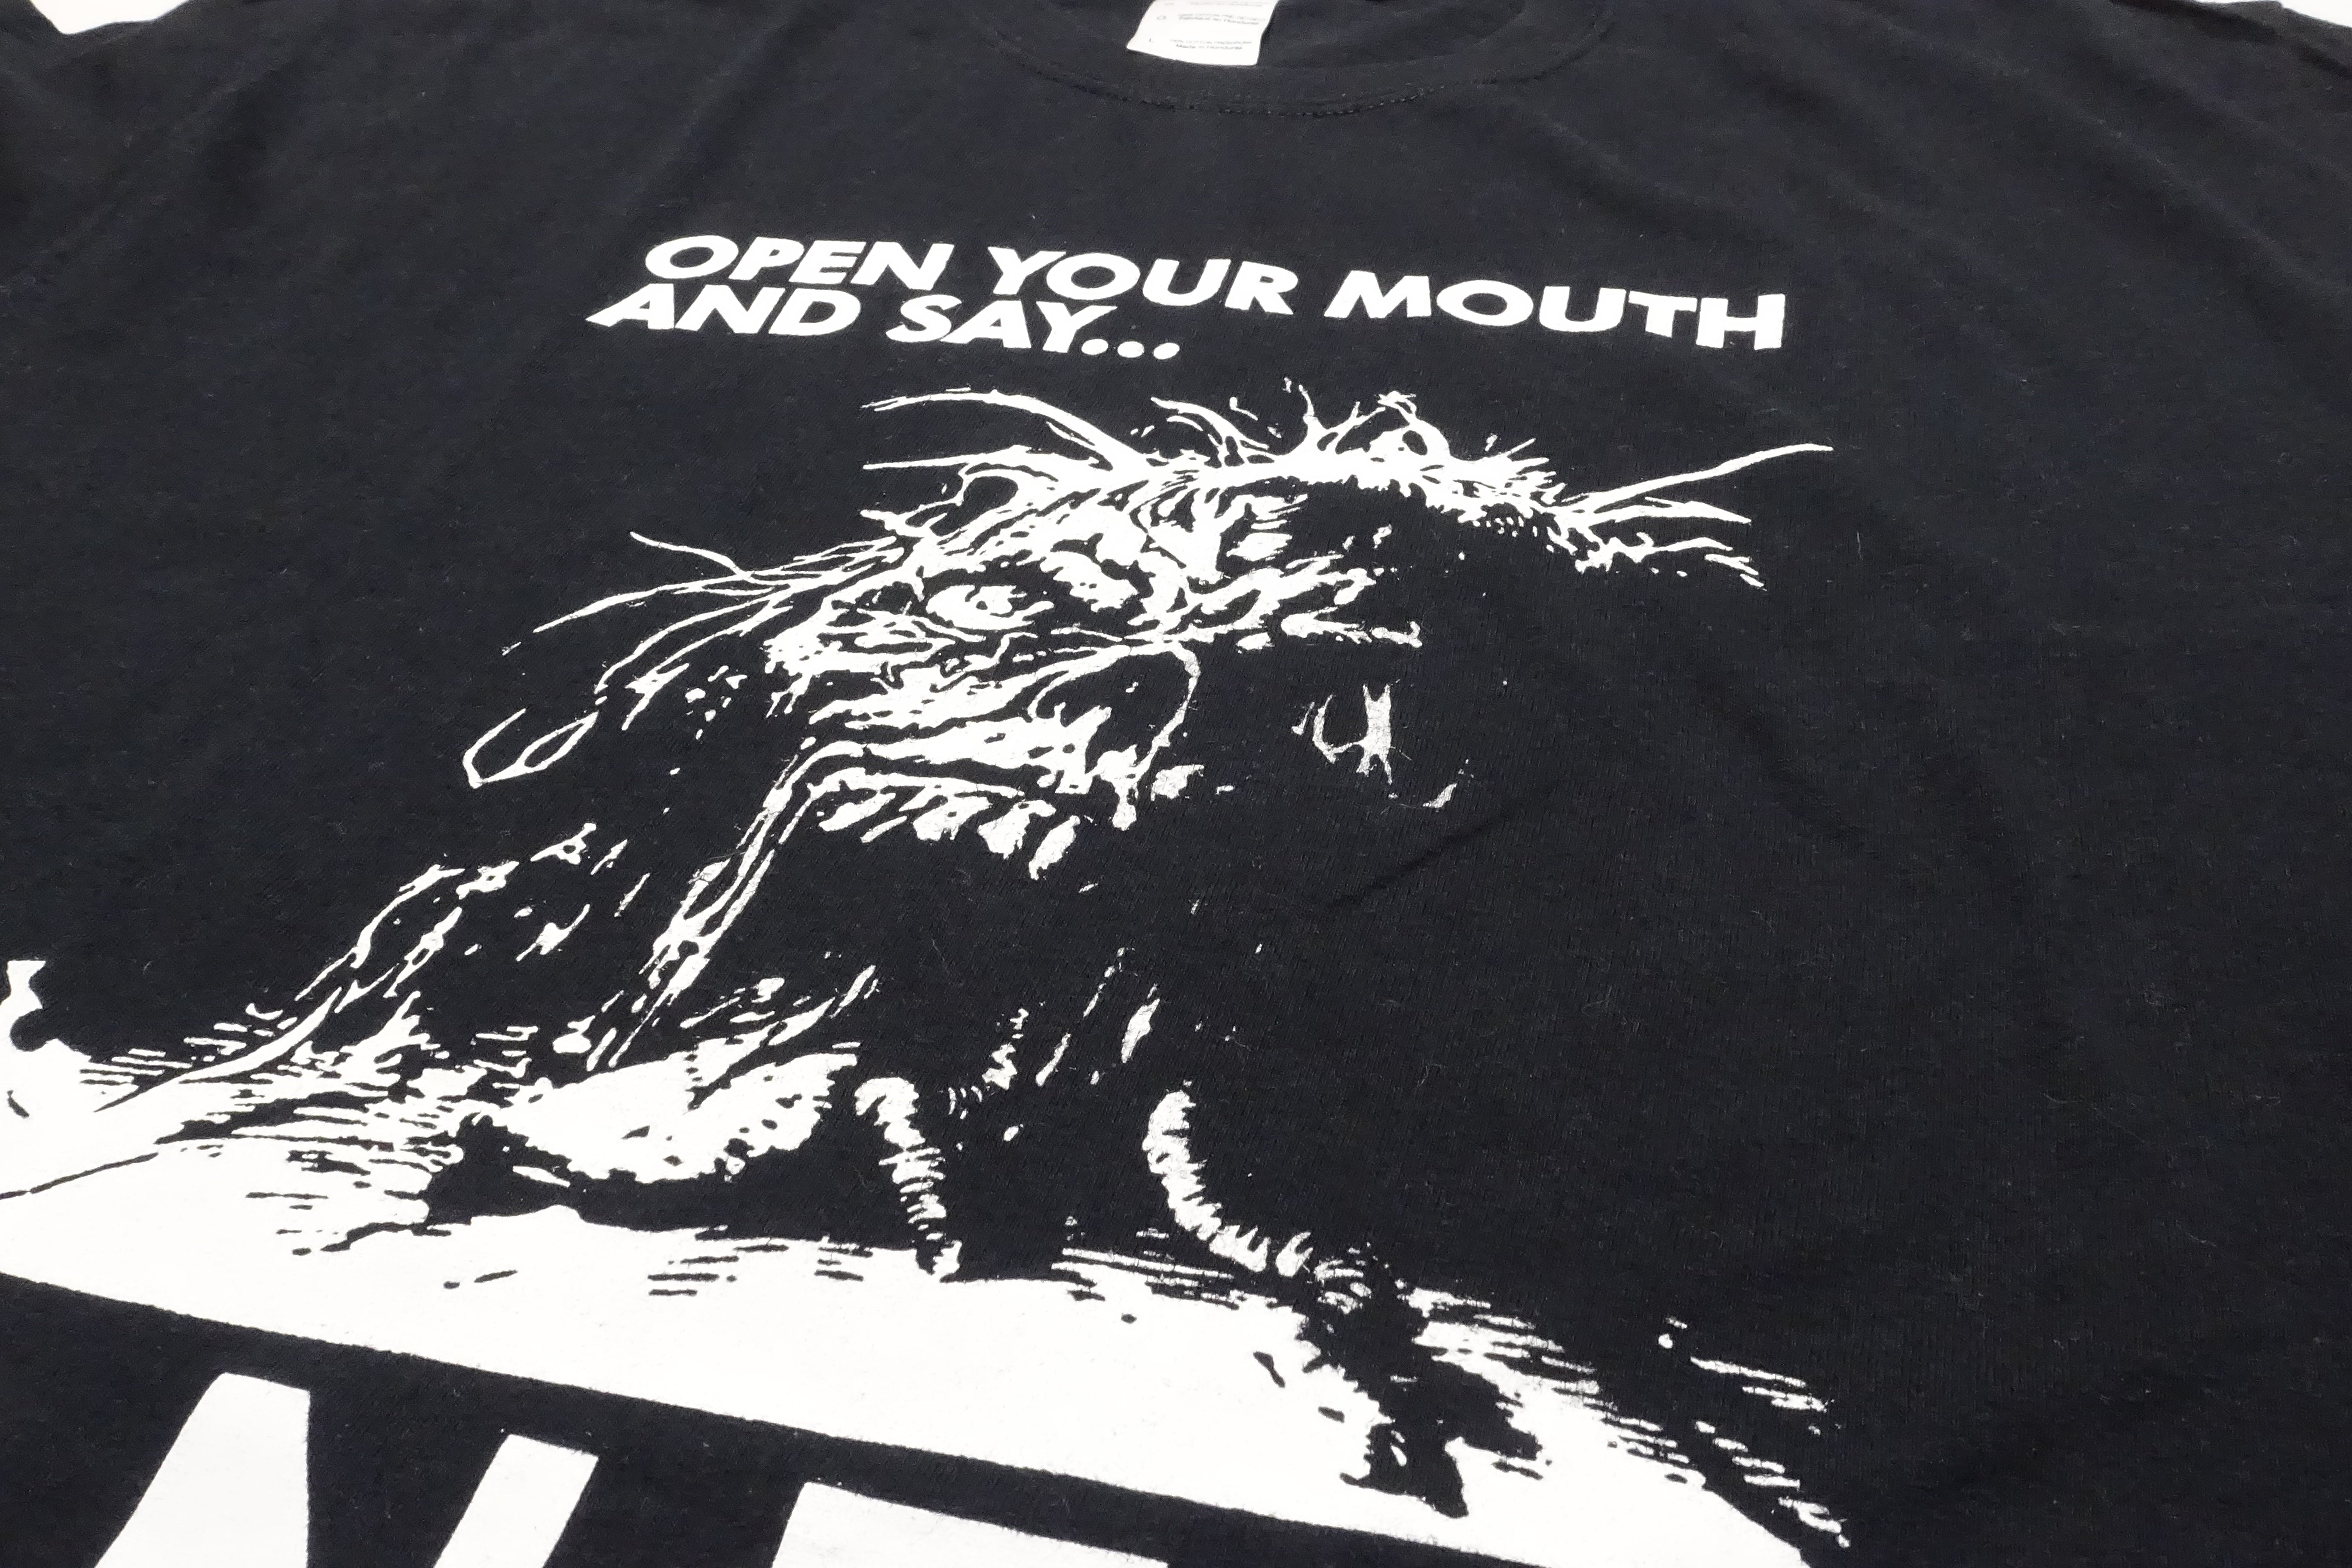 SNFU - Open Your Mouth And Say... Chest Print Tour Shirt Size Large